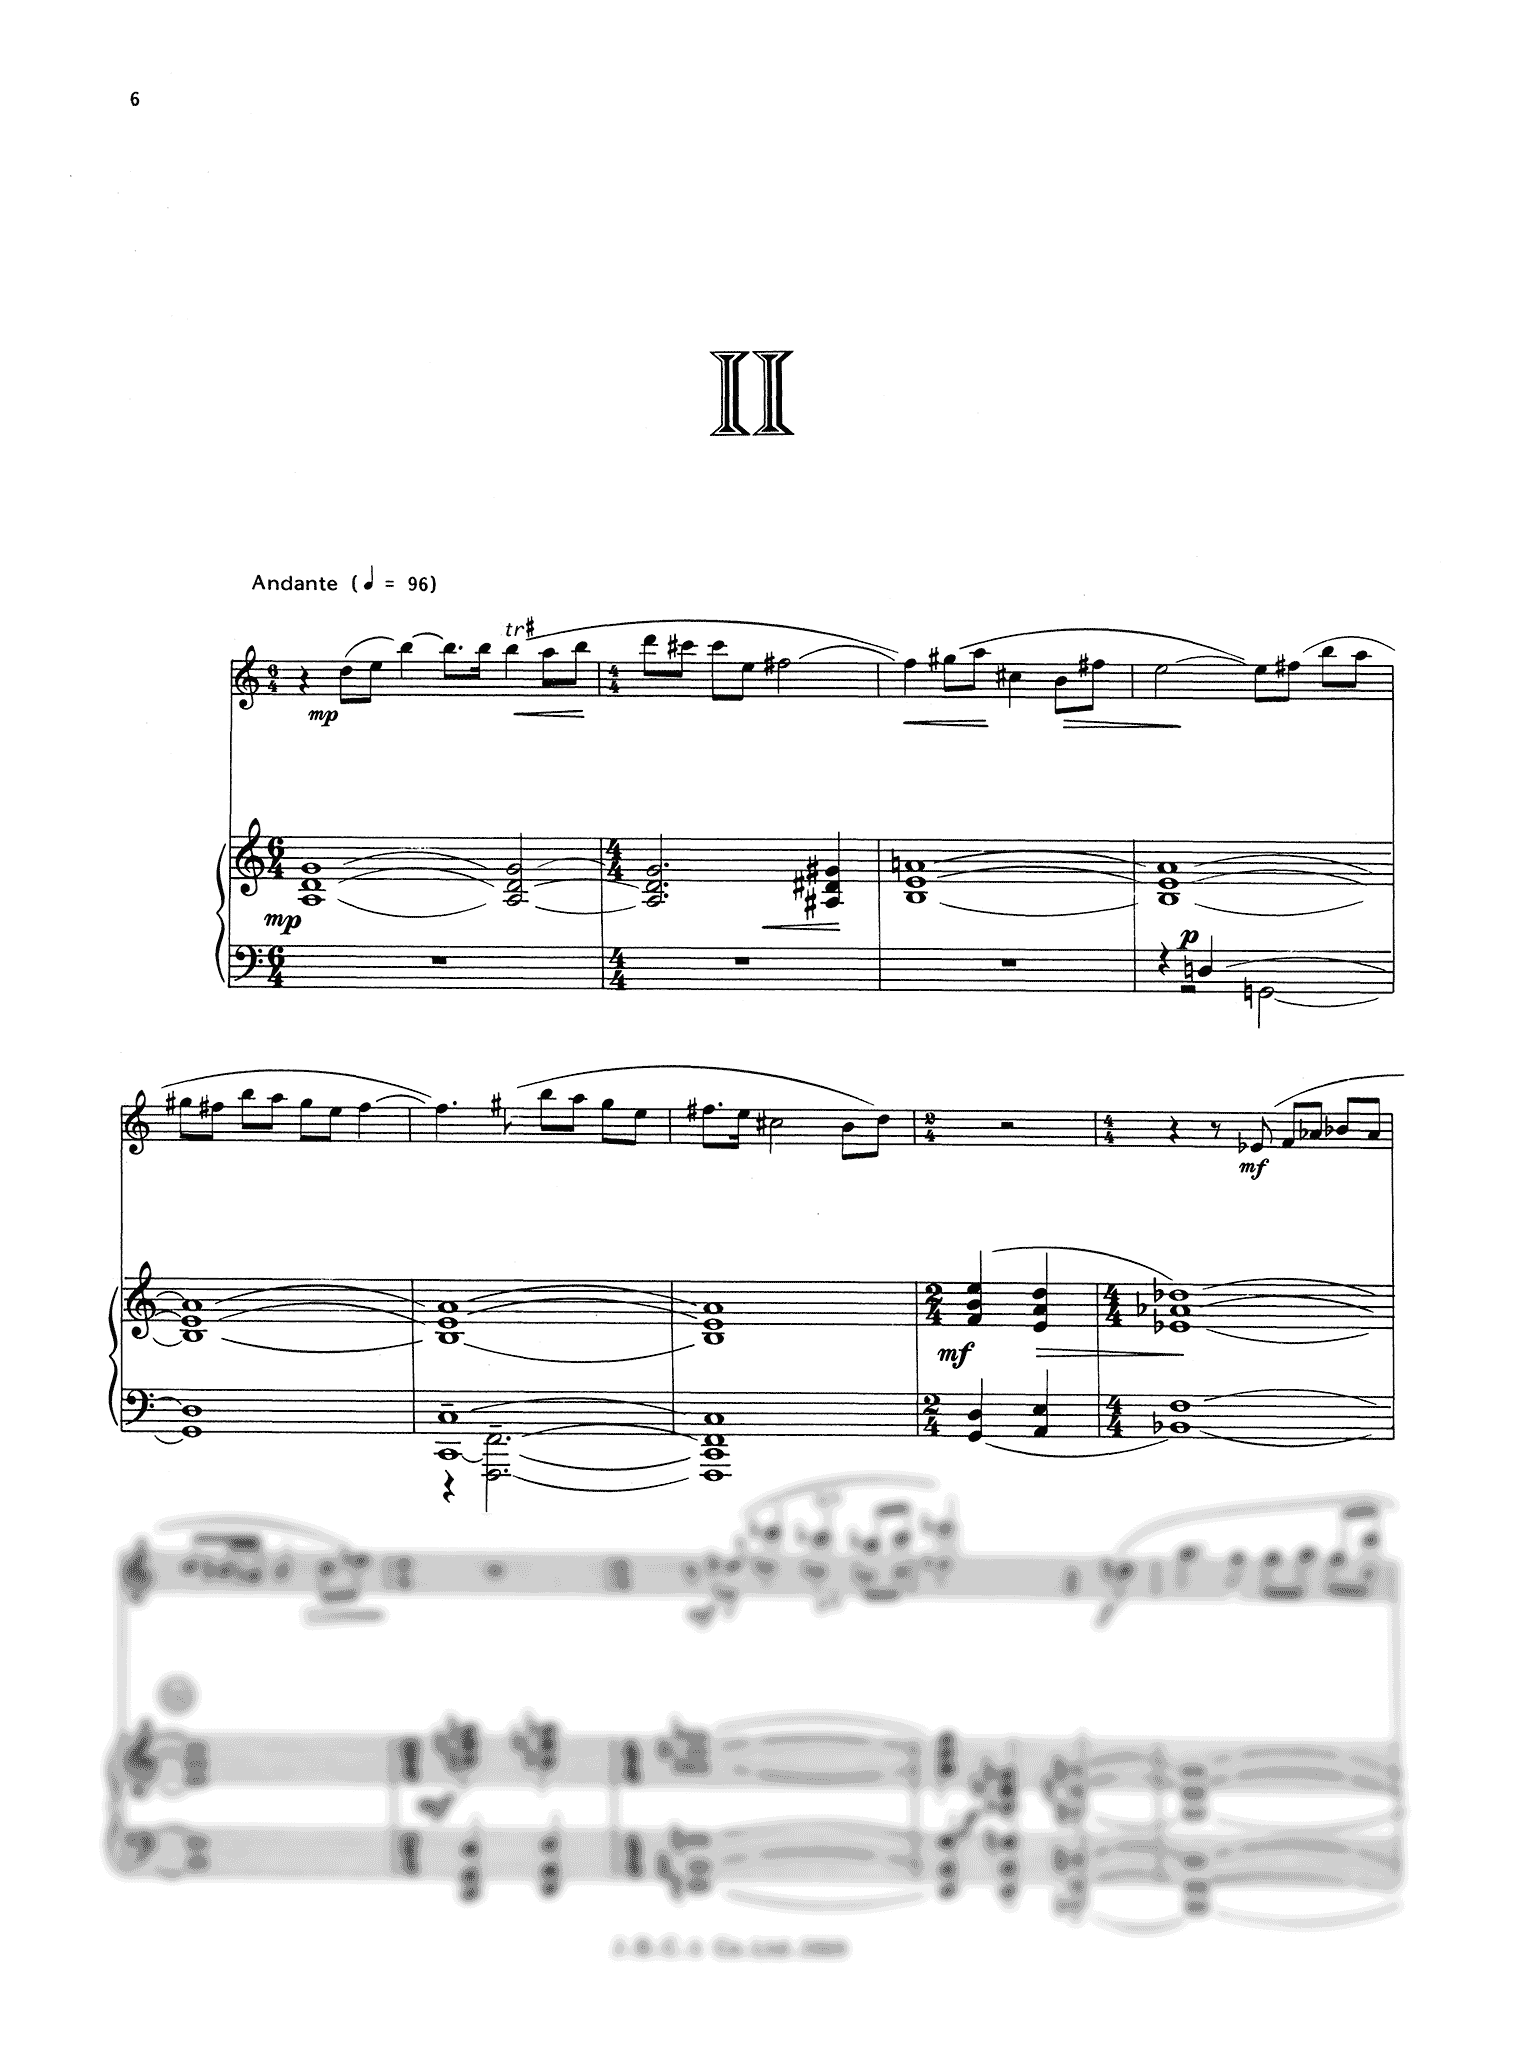 Carr Three Bagatelles clarinet and piano - Movement 2